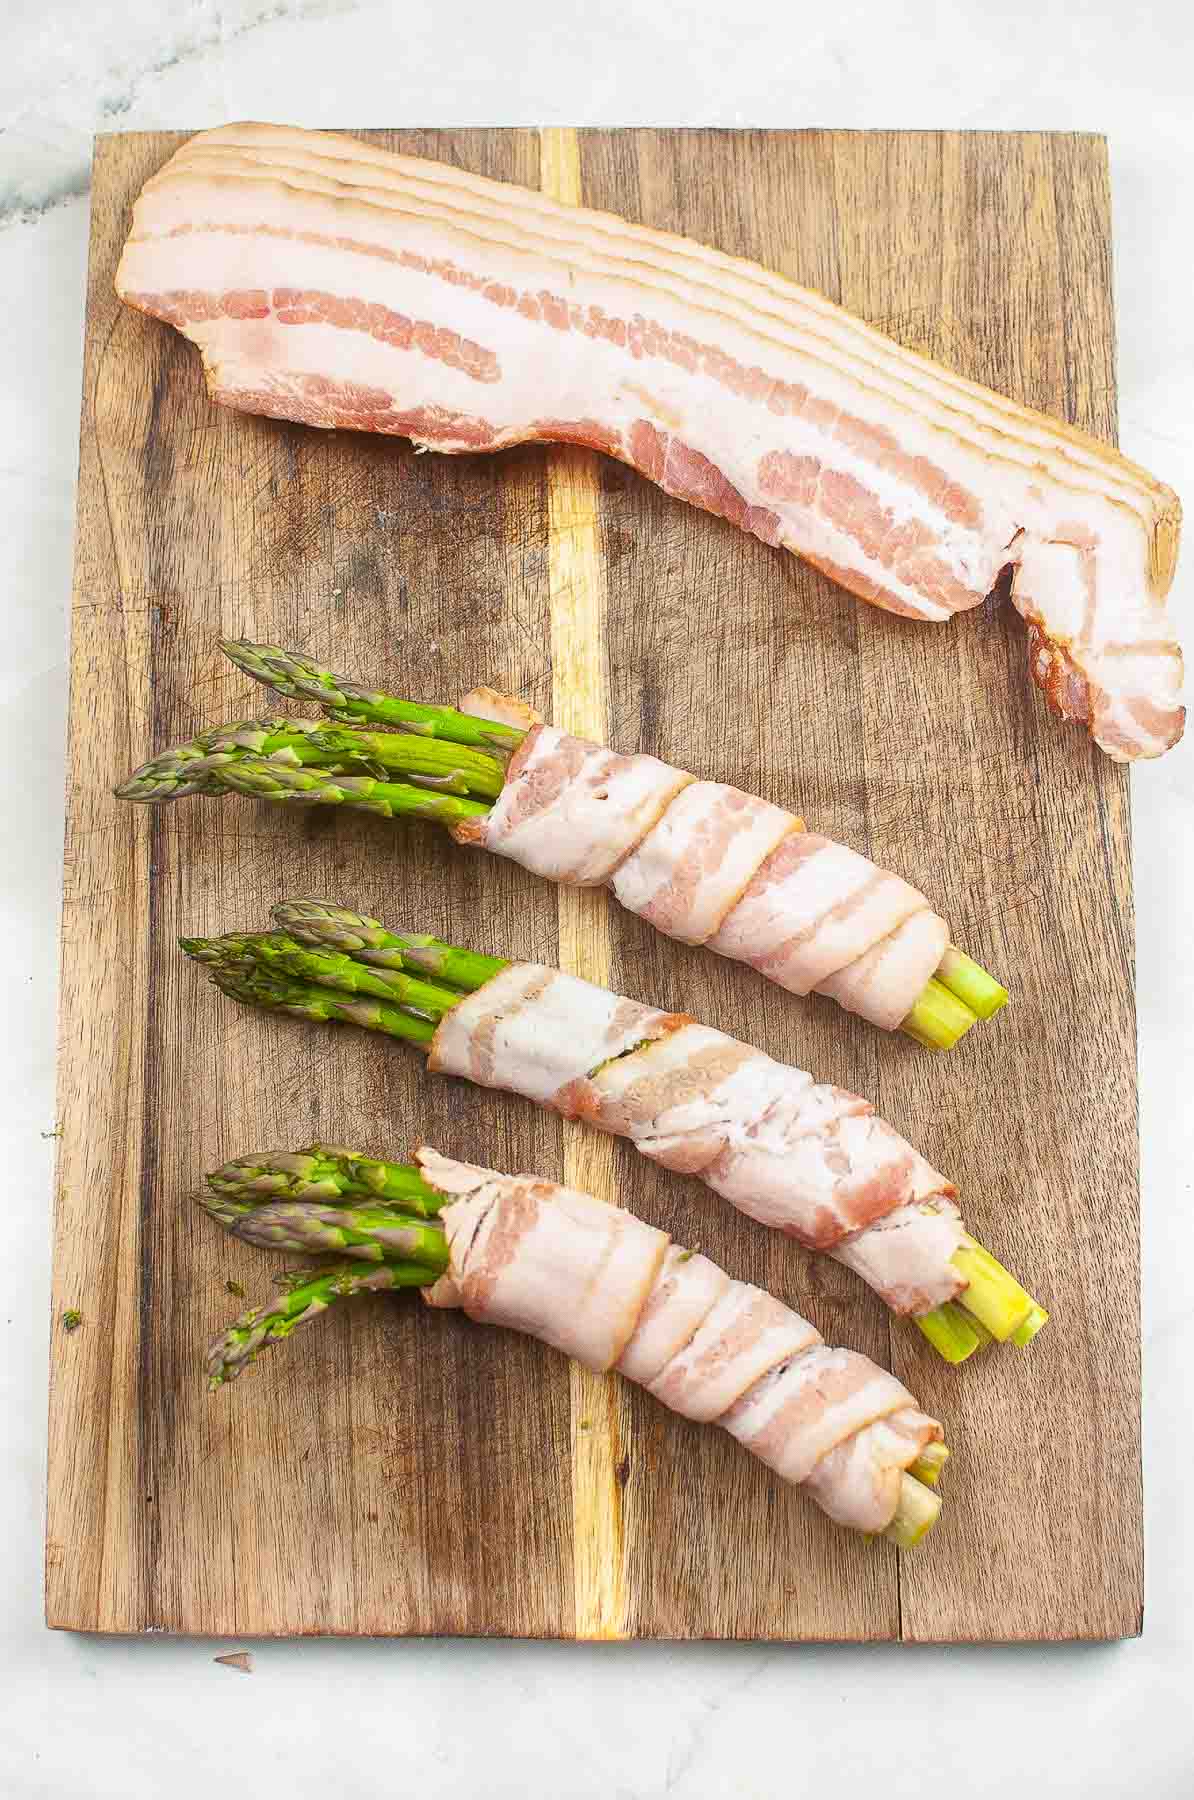 wood cutting board with three bundles of four asparagus spears wrapped in raw bacon.